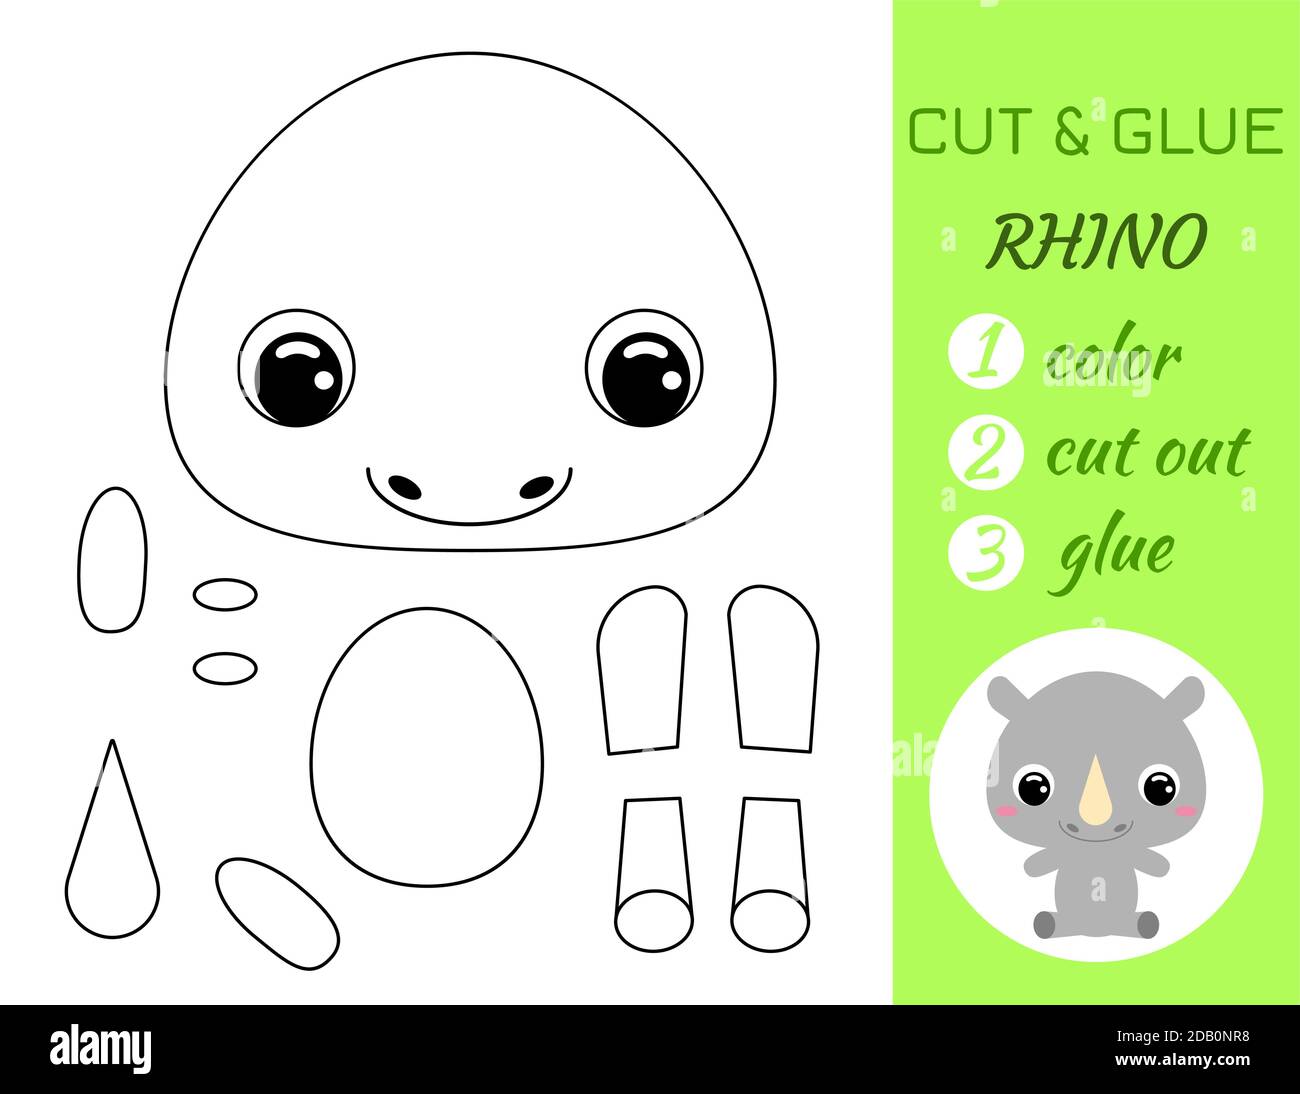 Simple educational game coloring page cut and glue sitting baby rhino for kids. Educational paper game for preschool children. Color, cut parts and gl Stock Vector